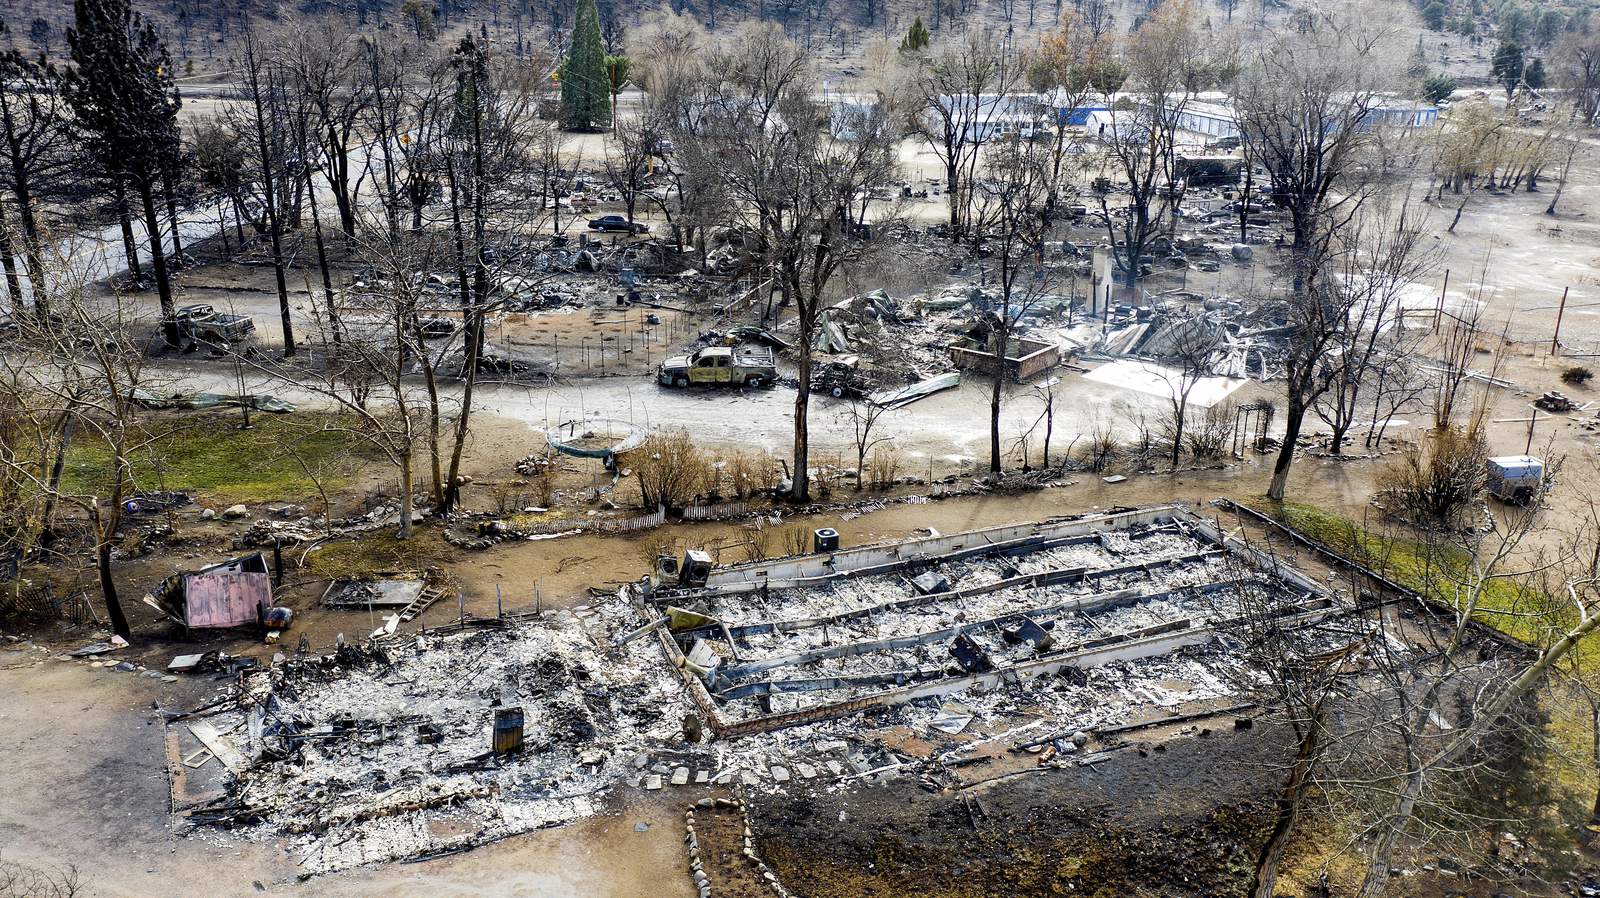 More than 100 displaced after fire ravages California town